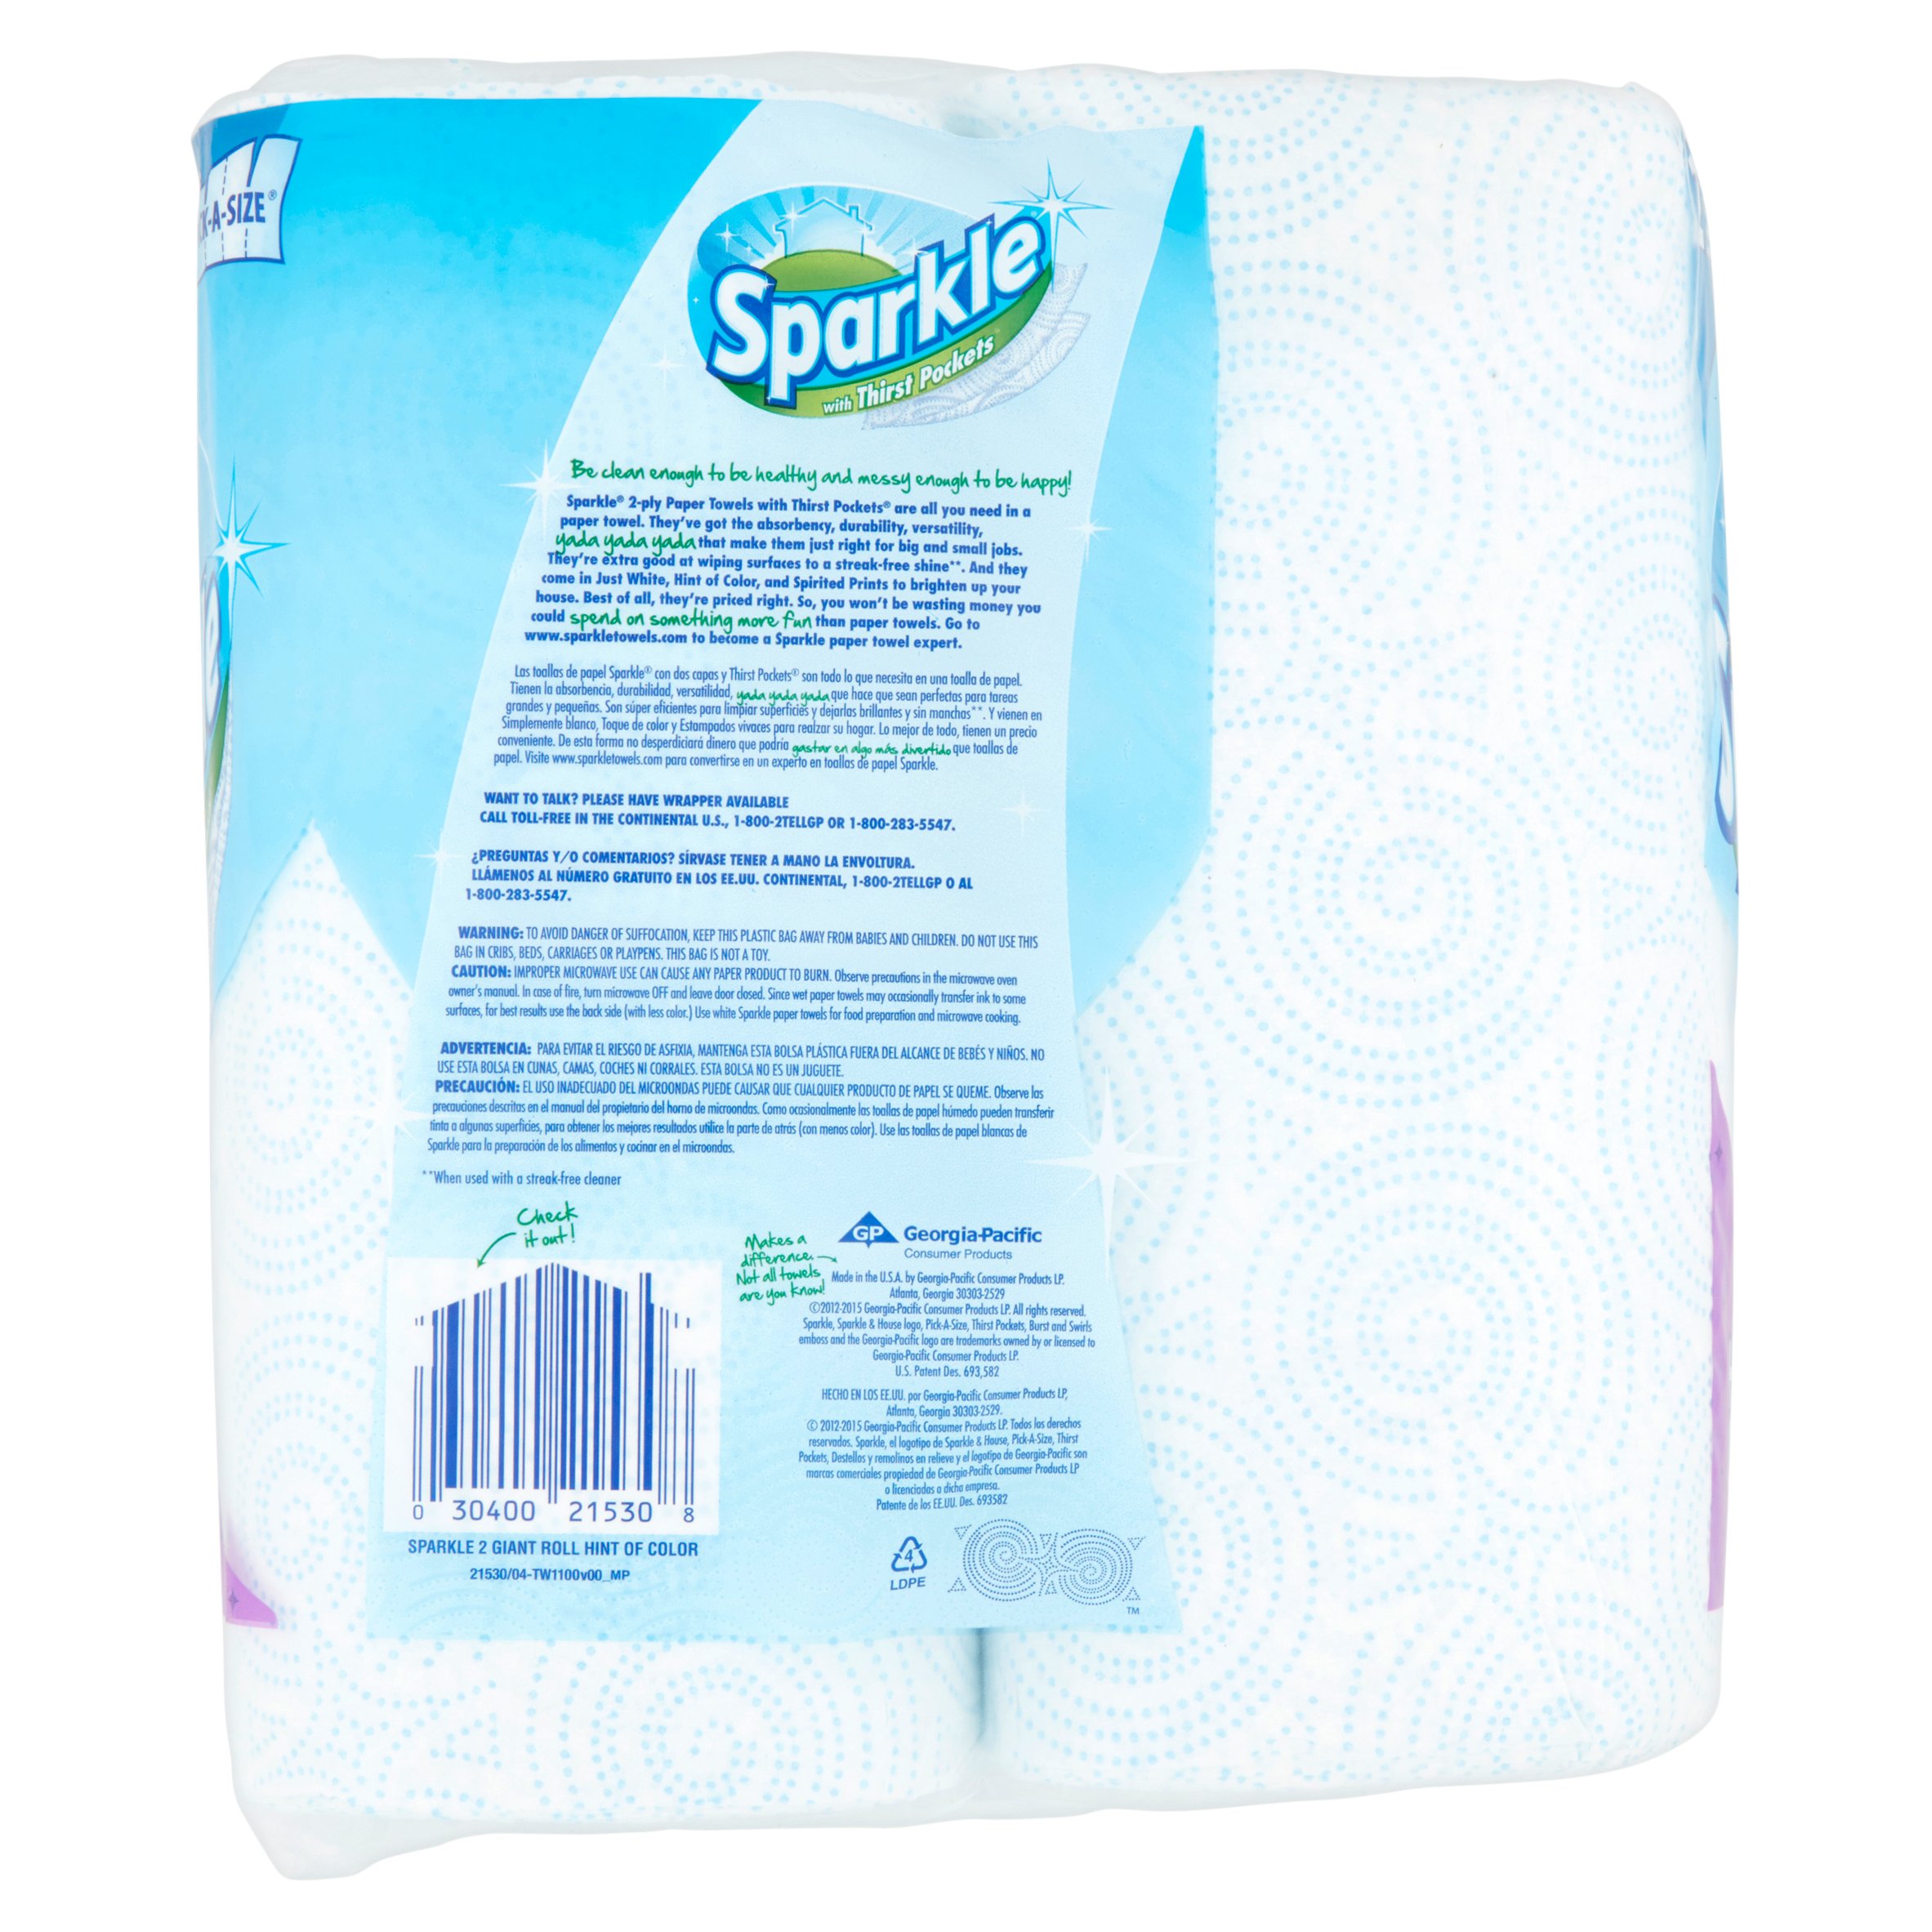 Sparkle Paper Towels with Thirst Pockets Rolls, 2 count - image 4 of 5